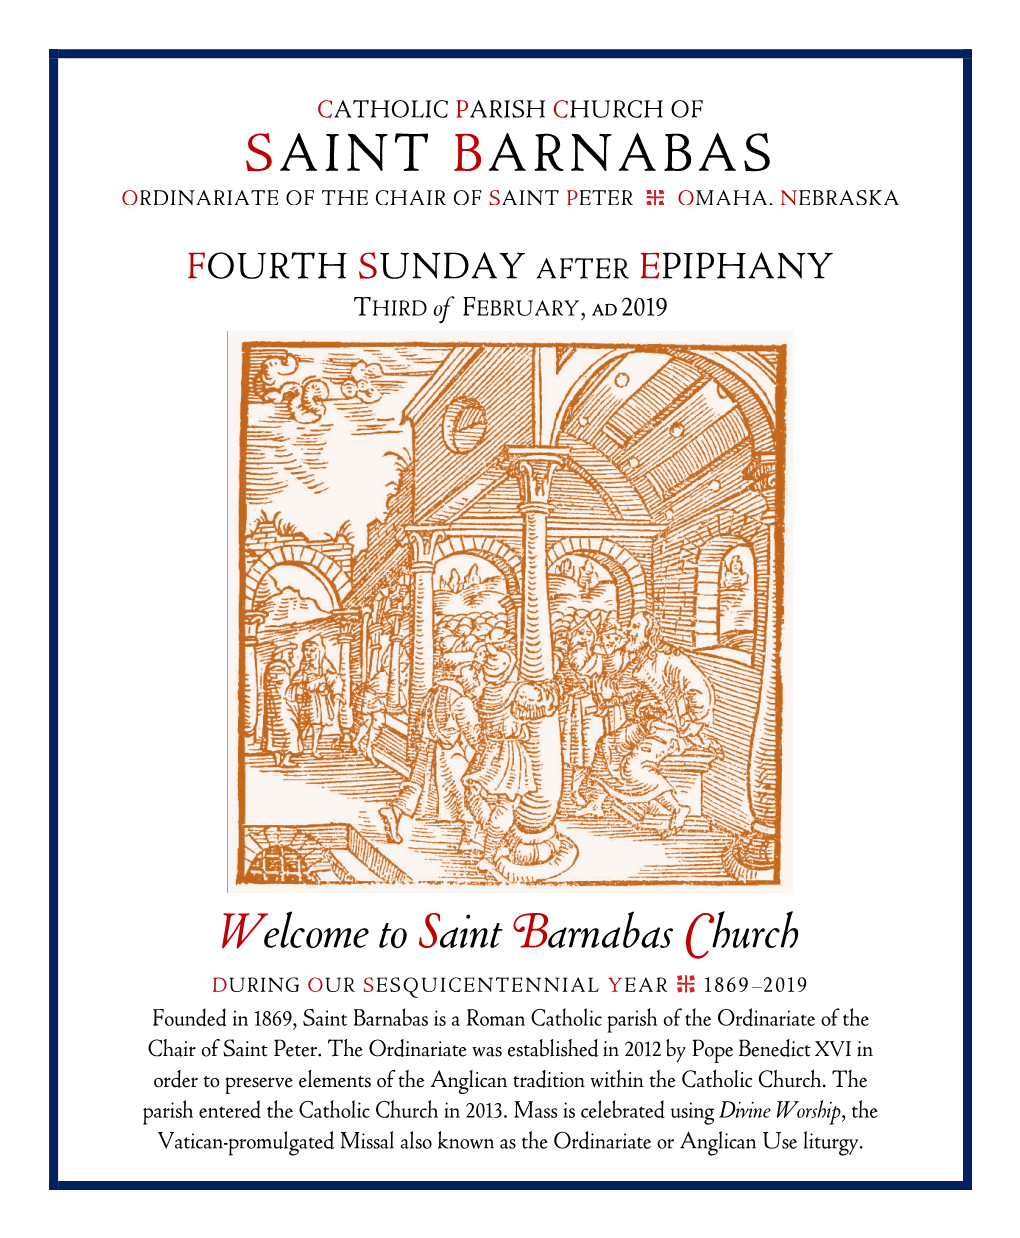 SAINT BARNABAS ORDINARIATE of the CHAIR of SAINT PETER OMAHA, NEBRASKA FOURTH SUNDAY AFTER EPIPHANY THIRD of FEBRUARY, Ad 2019